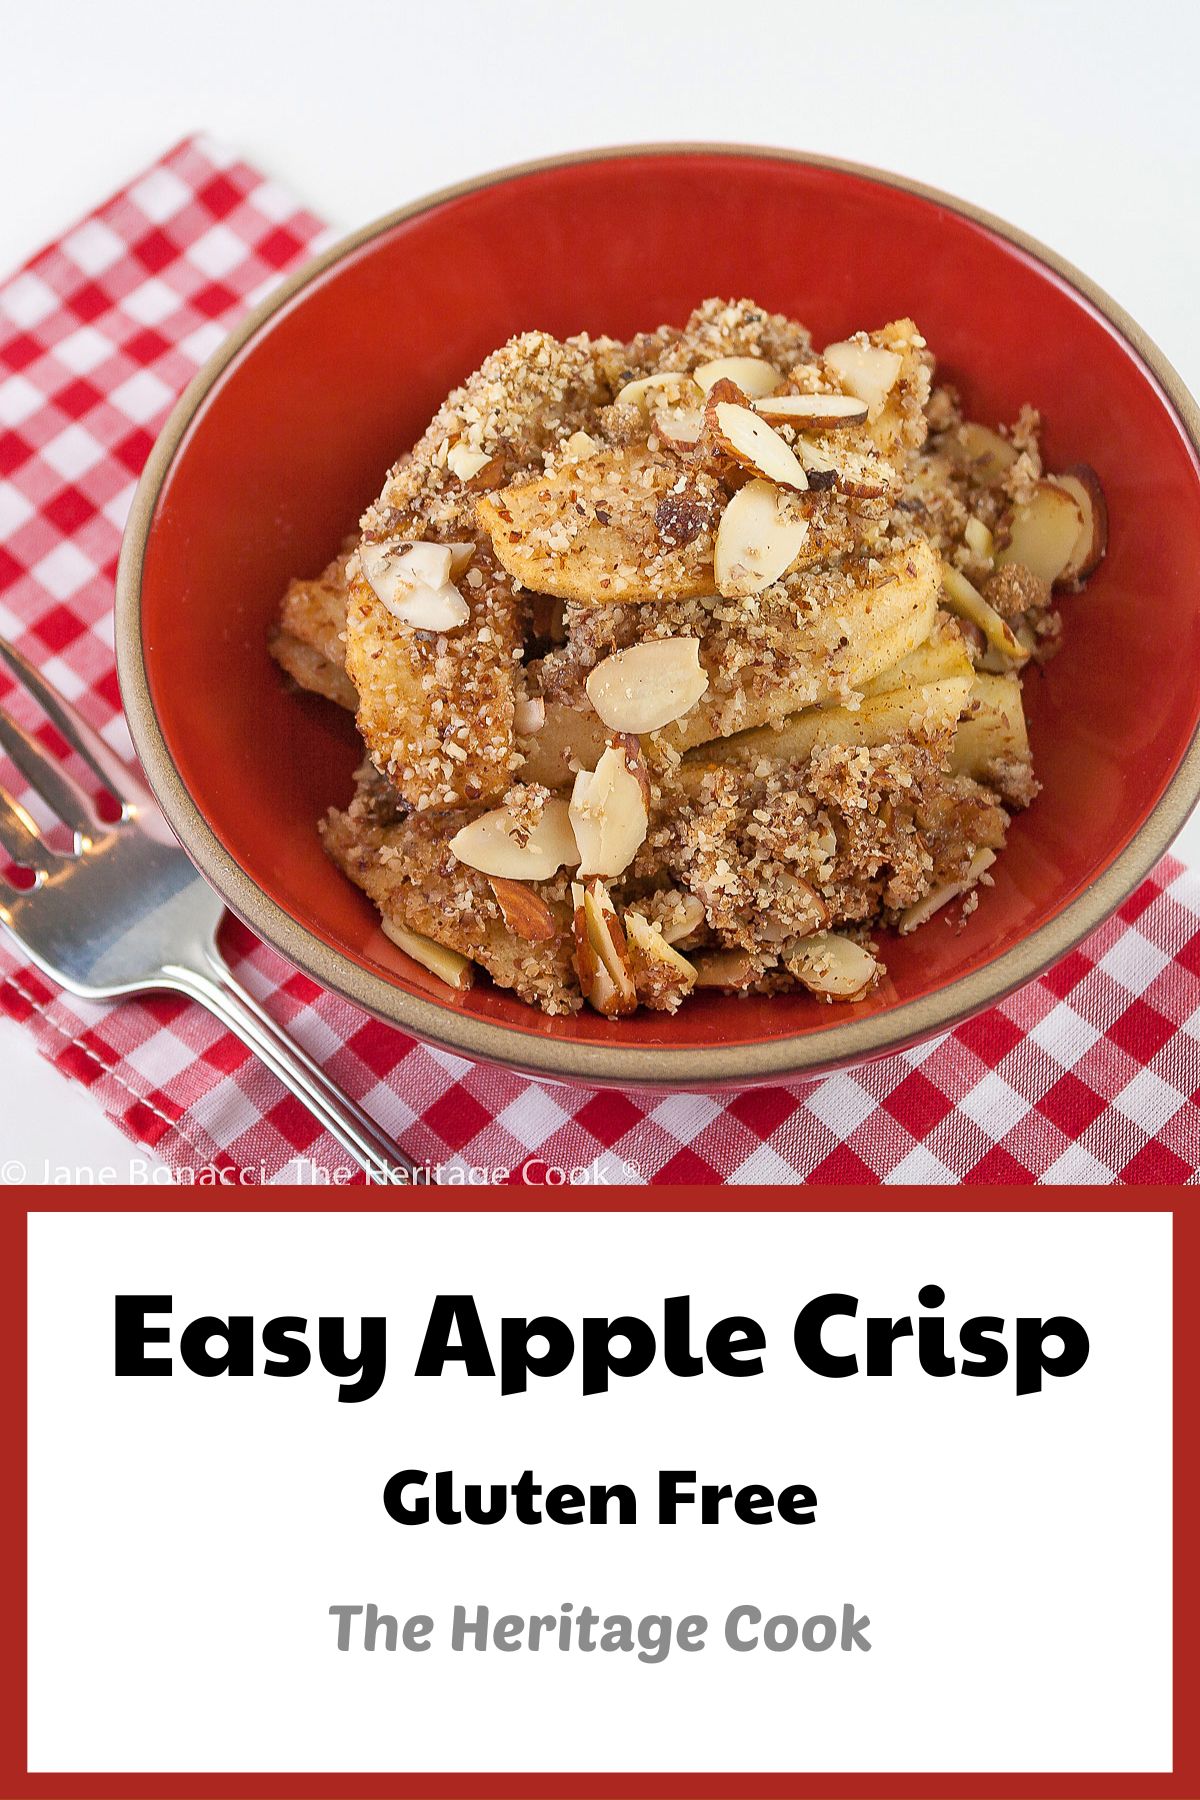 Sweetened apple filling and crispy topping with almonds served in a red bowl; Gluten-Free Apple Crisp © 2022 Jane Bonacci, The Heritage Cook.